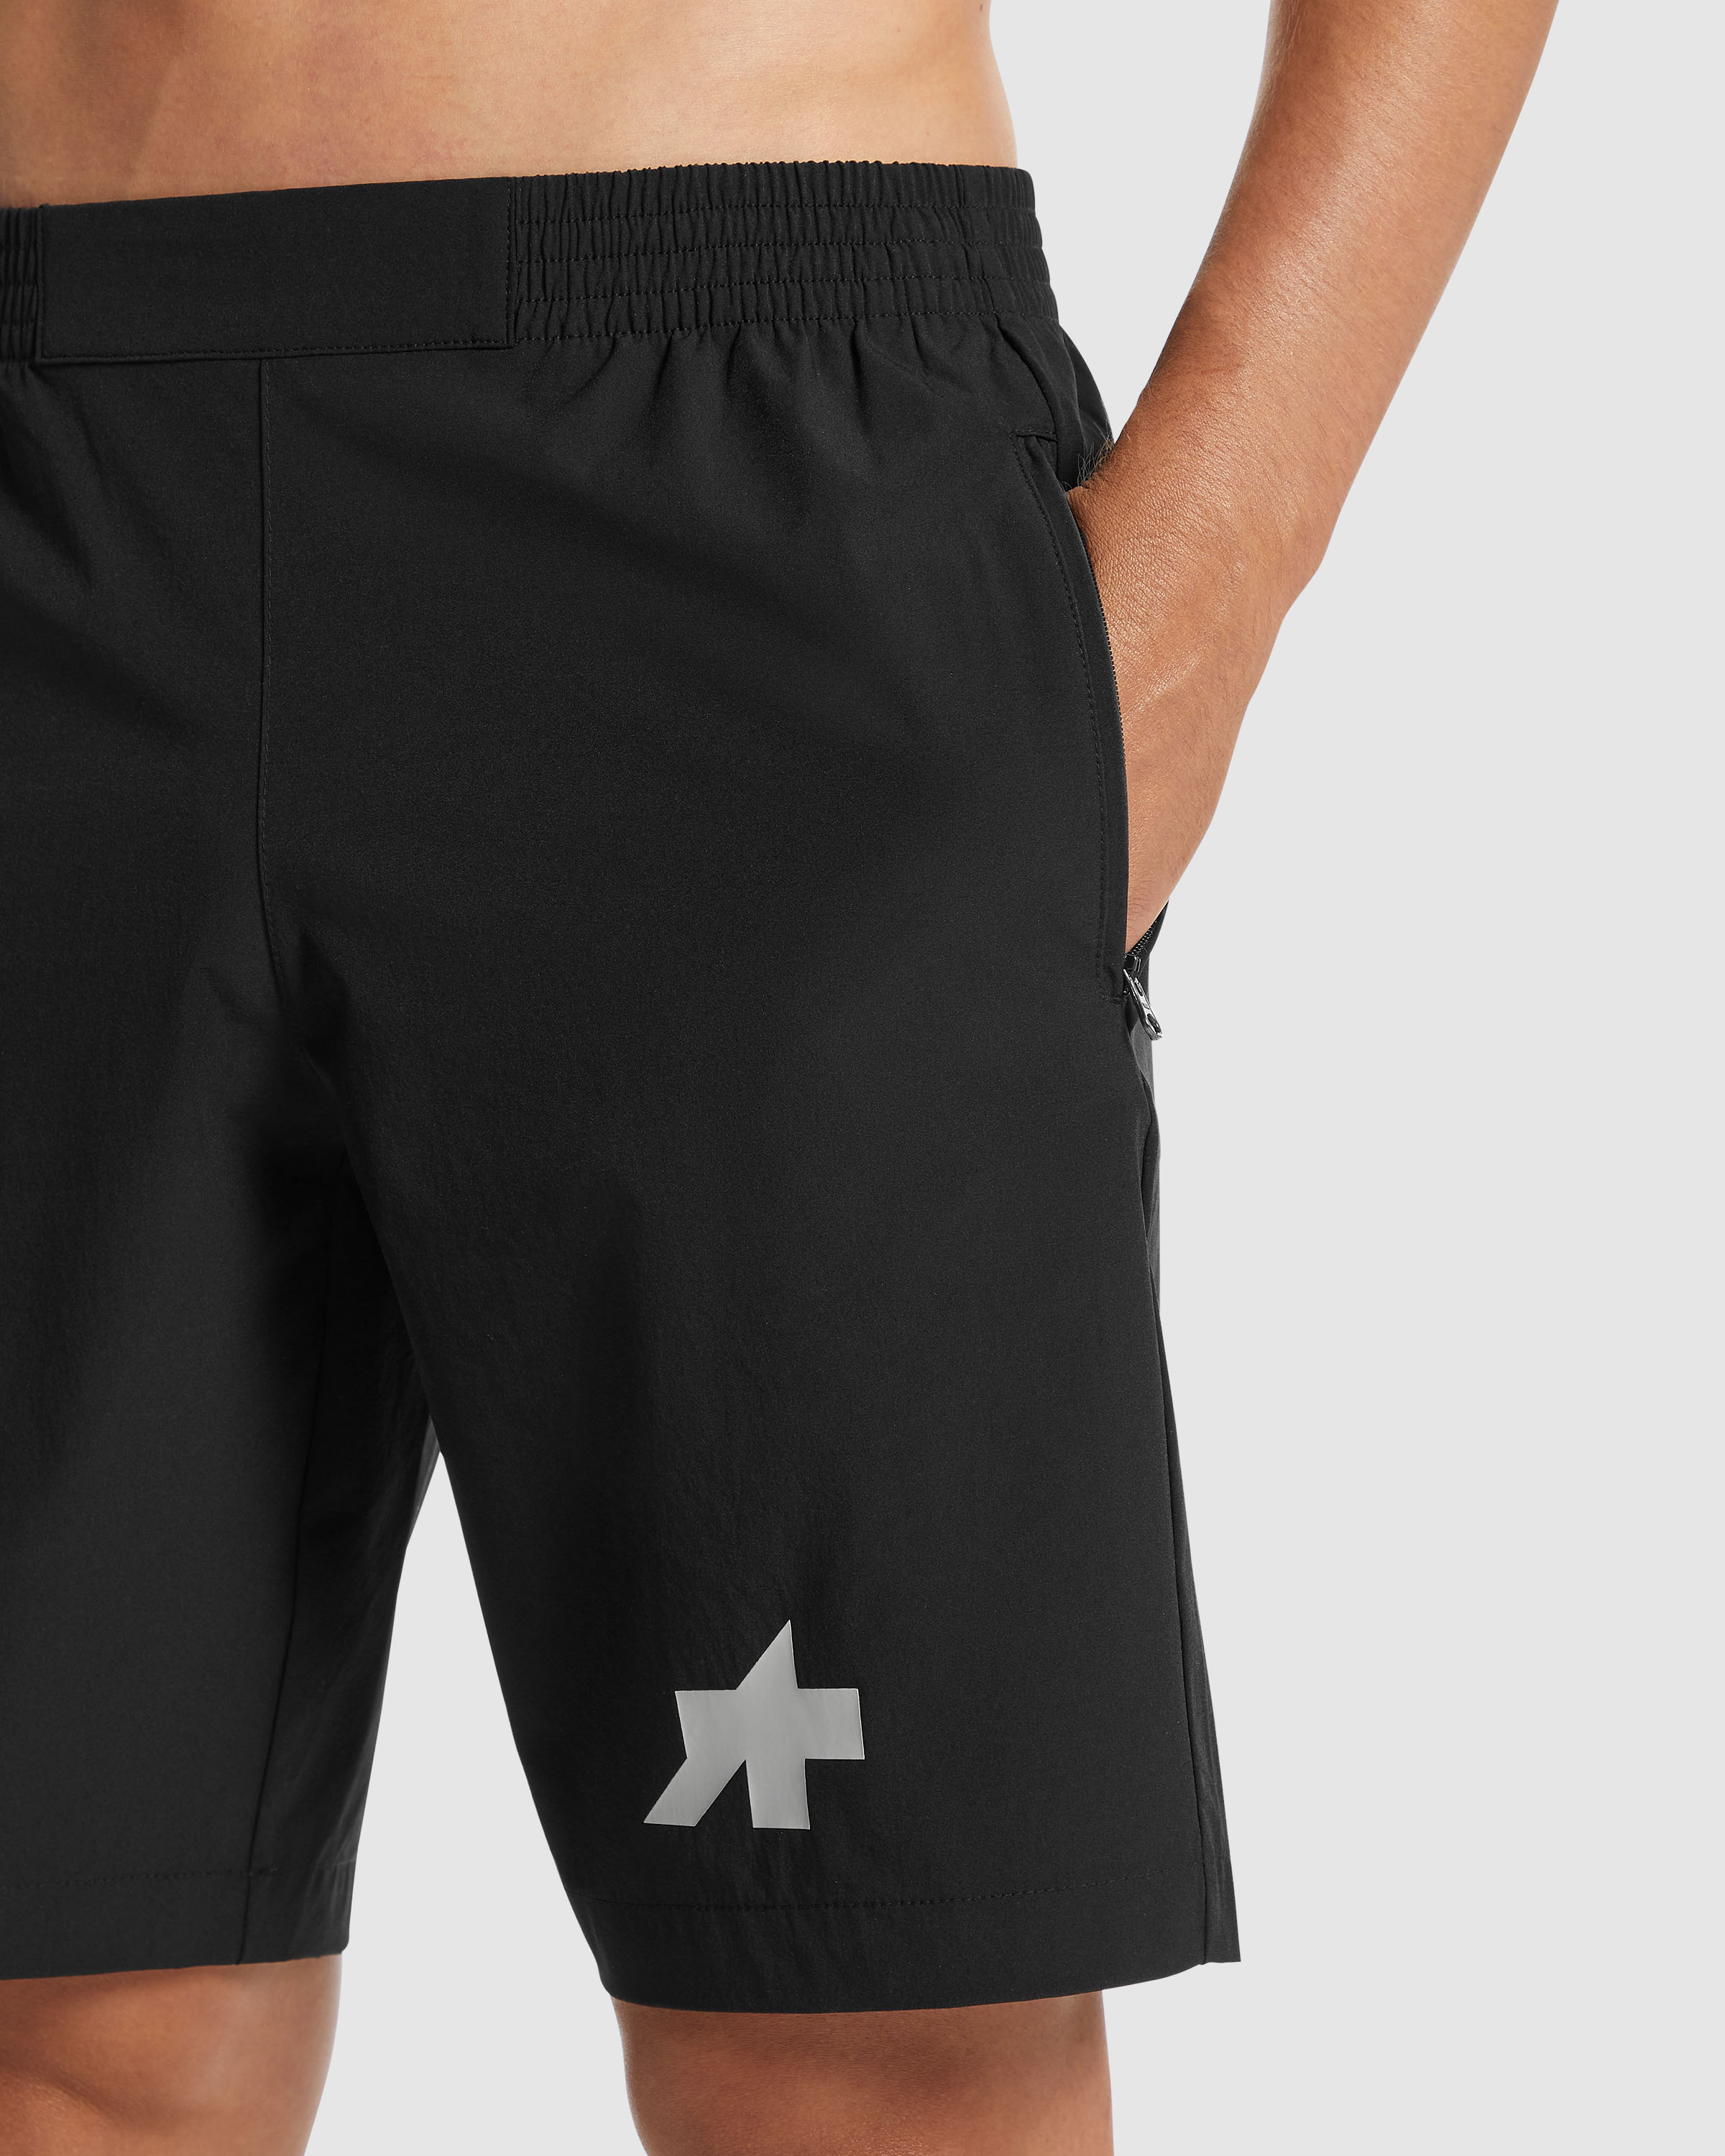 SIGNATURE Shorts - ASSOS Of Switzerland - Official Outlet